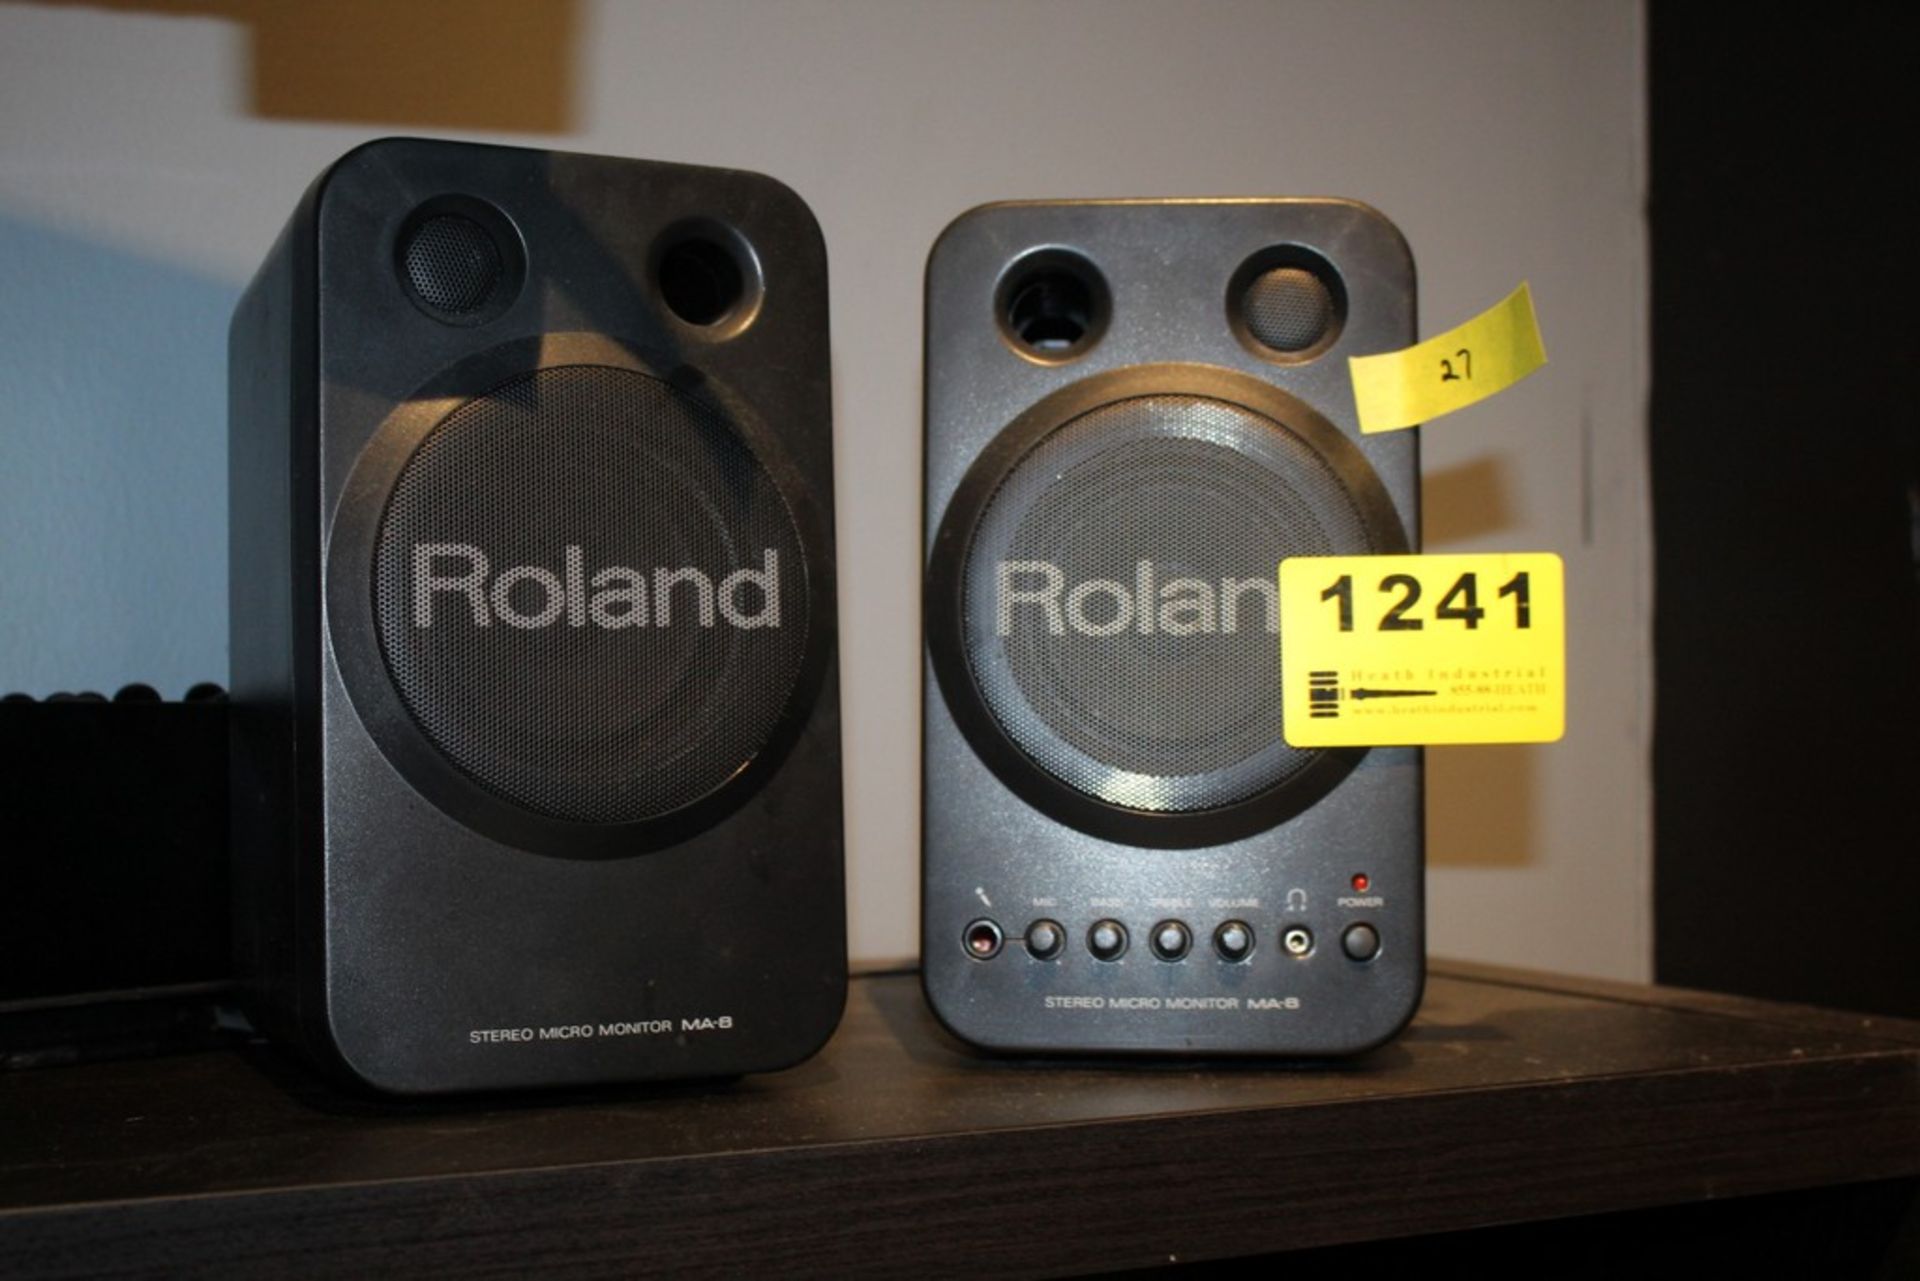 ROLAND MODEL MA8 MICRO MONITOR SPEAKERS (PAIR)